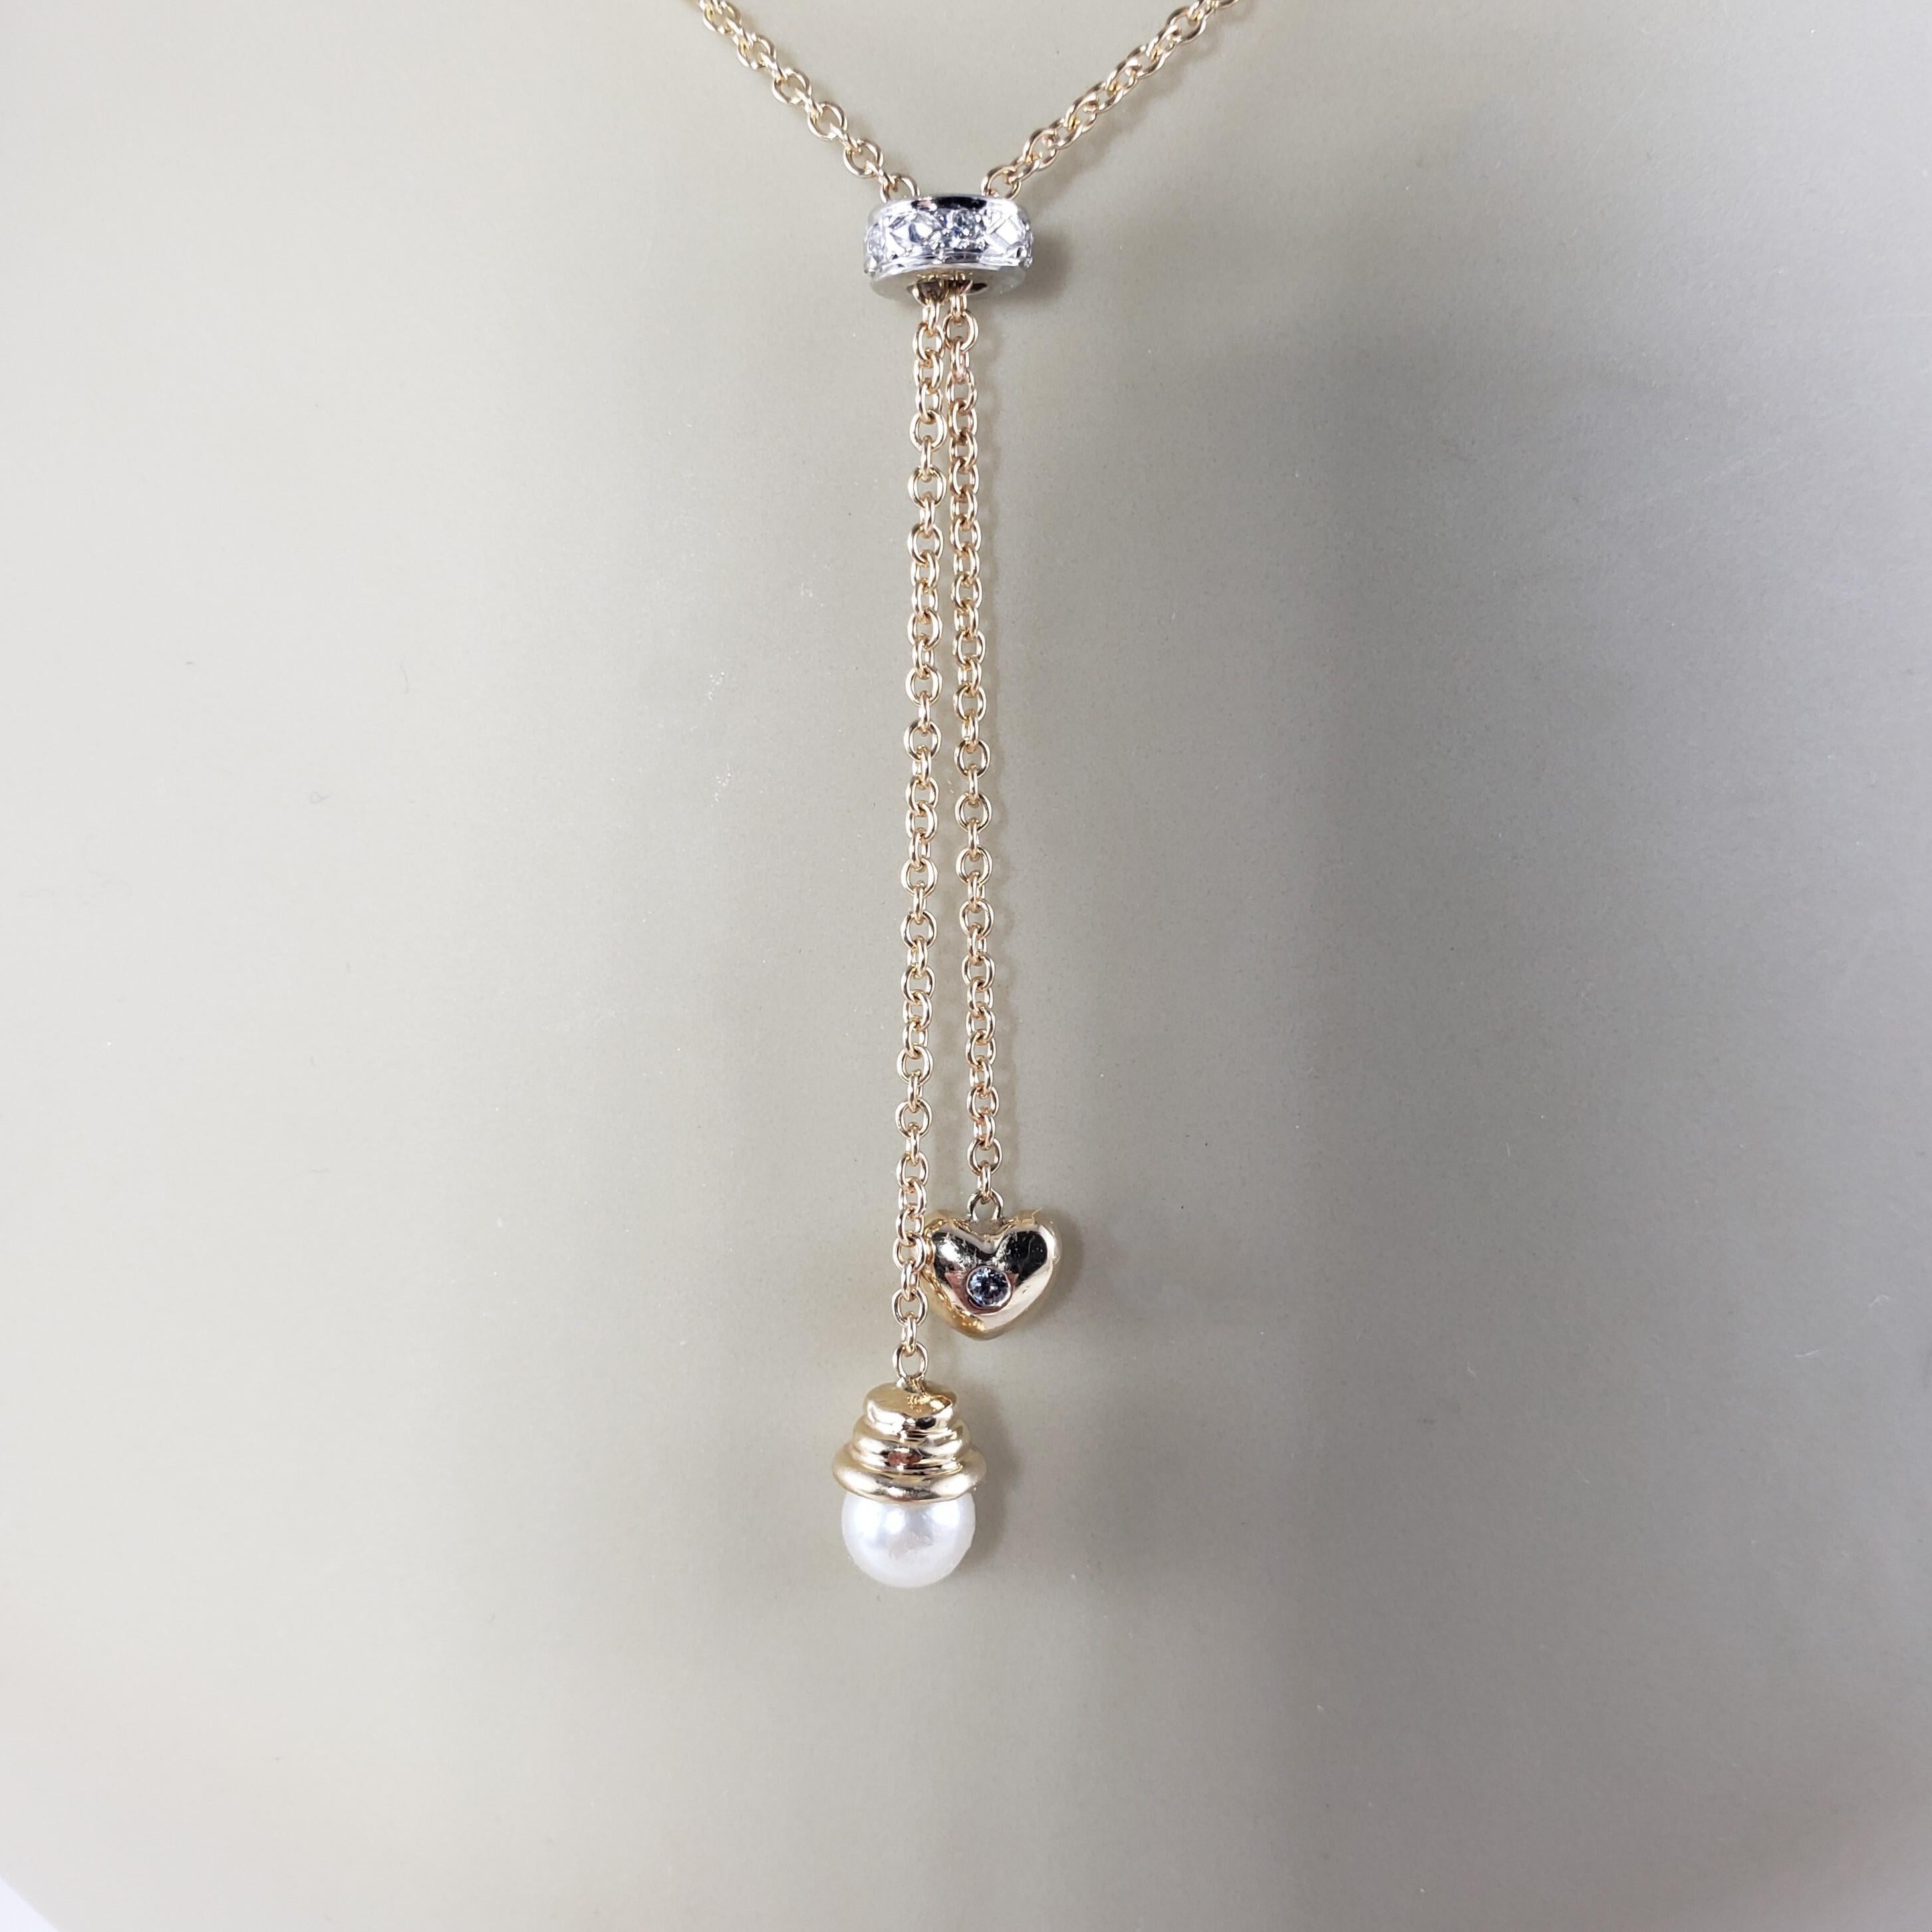 14 Karat Yellow Gold, Diamond and Pearl Necklace #14933 For Sale 4